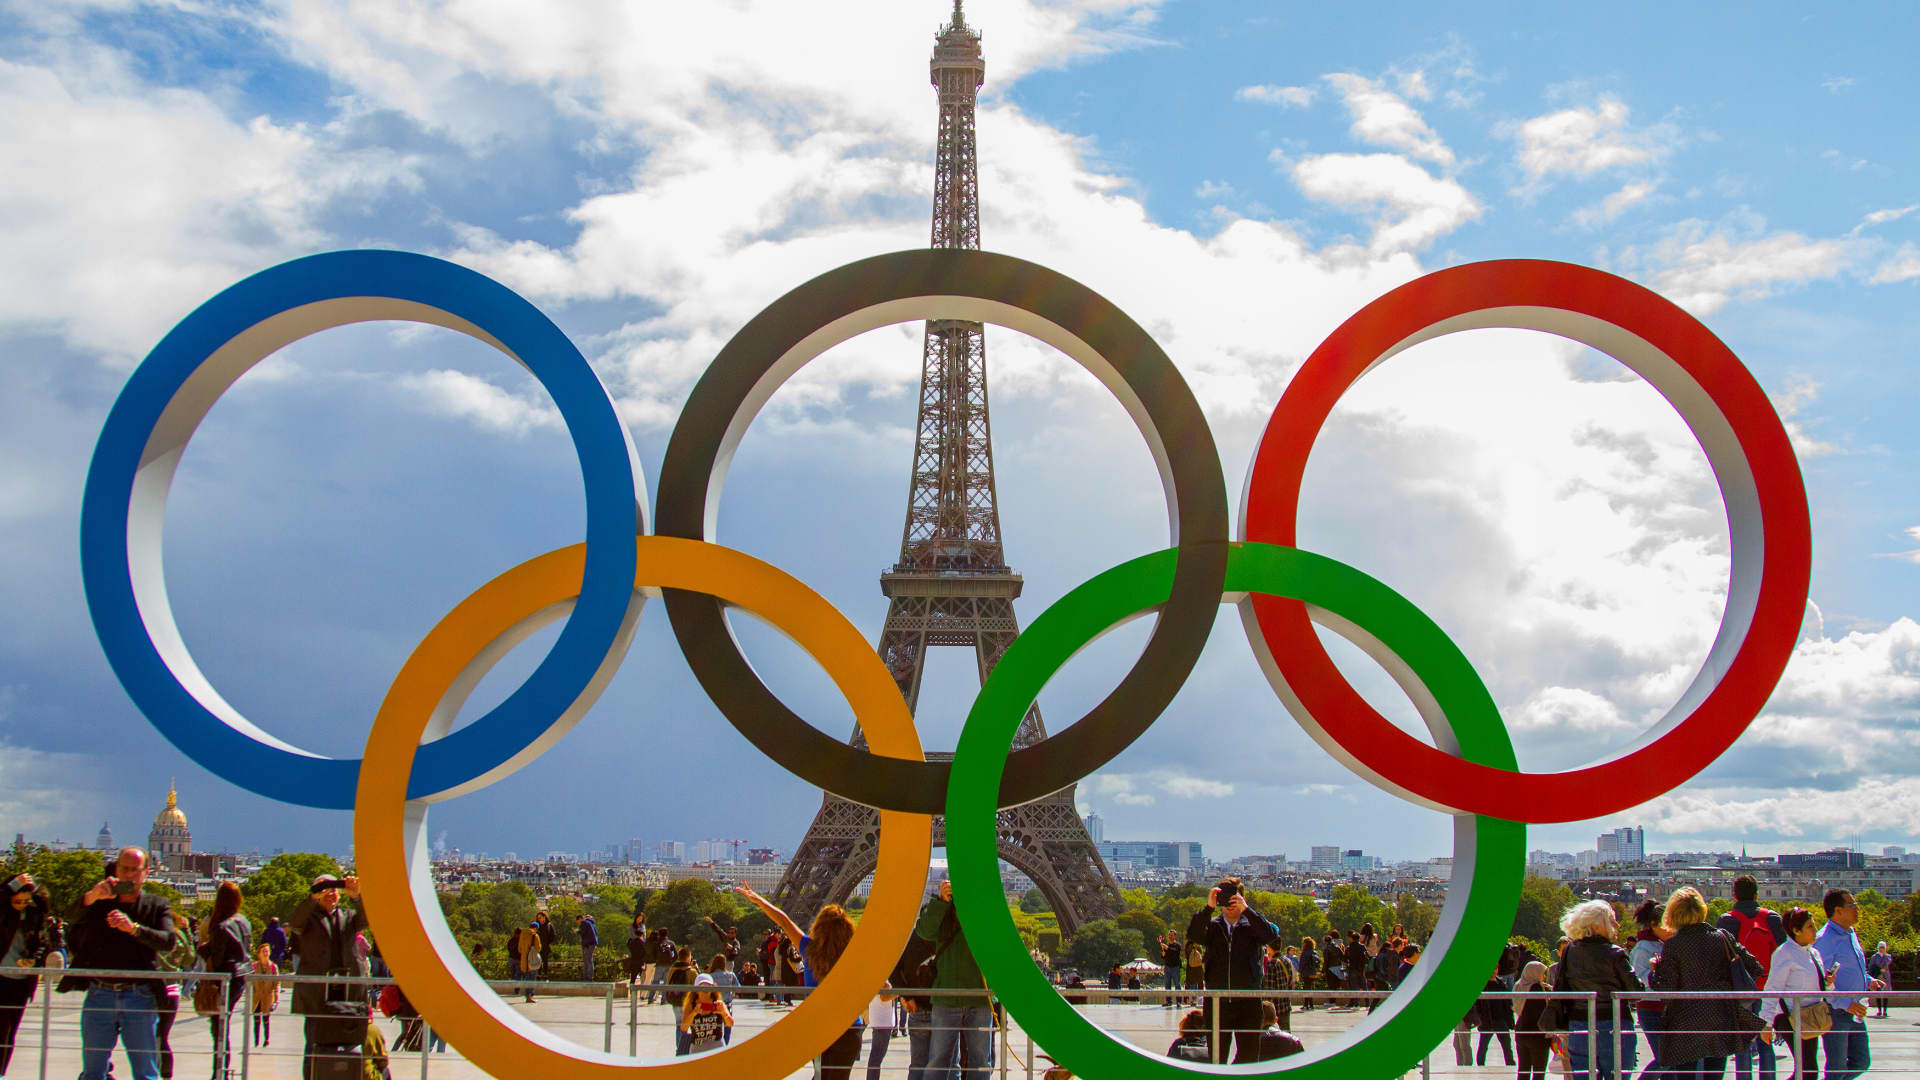 More people than ever expected to bet on Summer Olympics after U.S. legal gambling boom